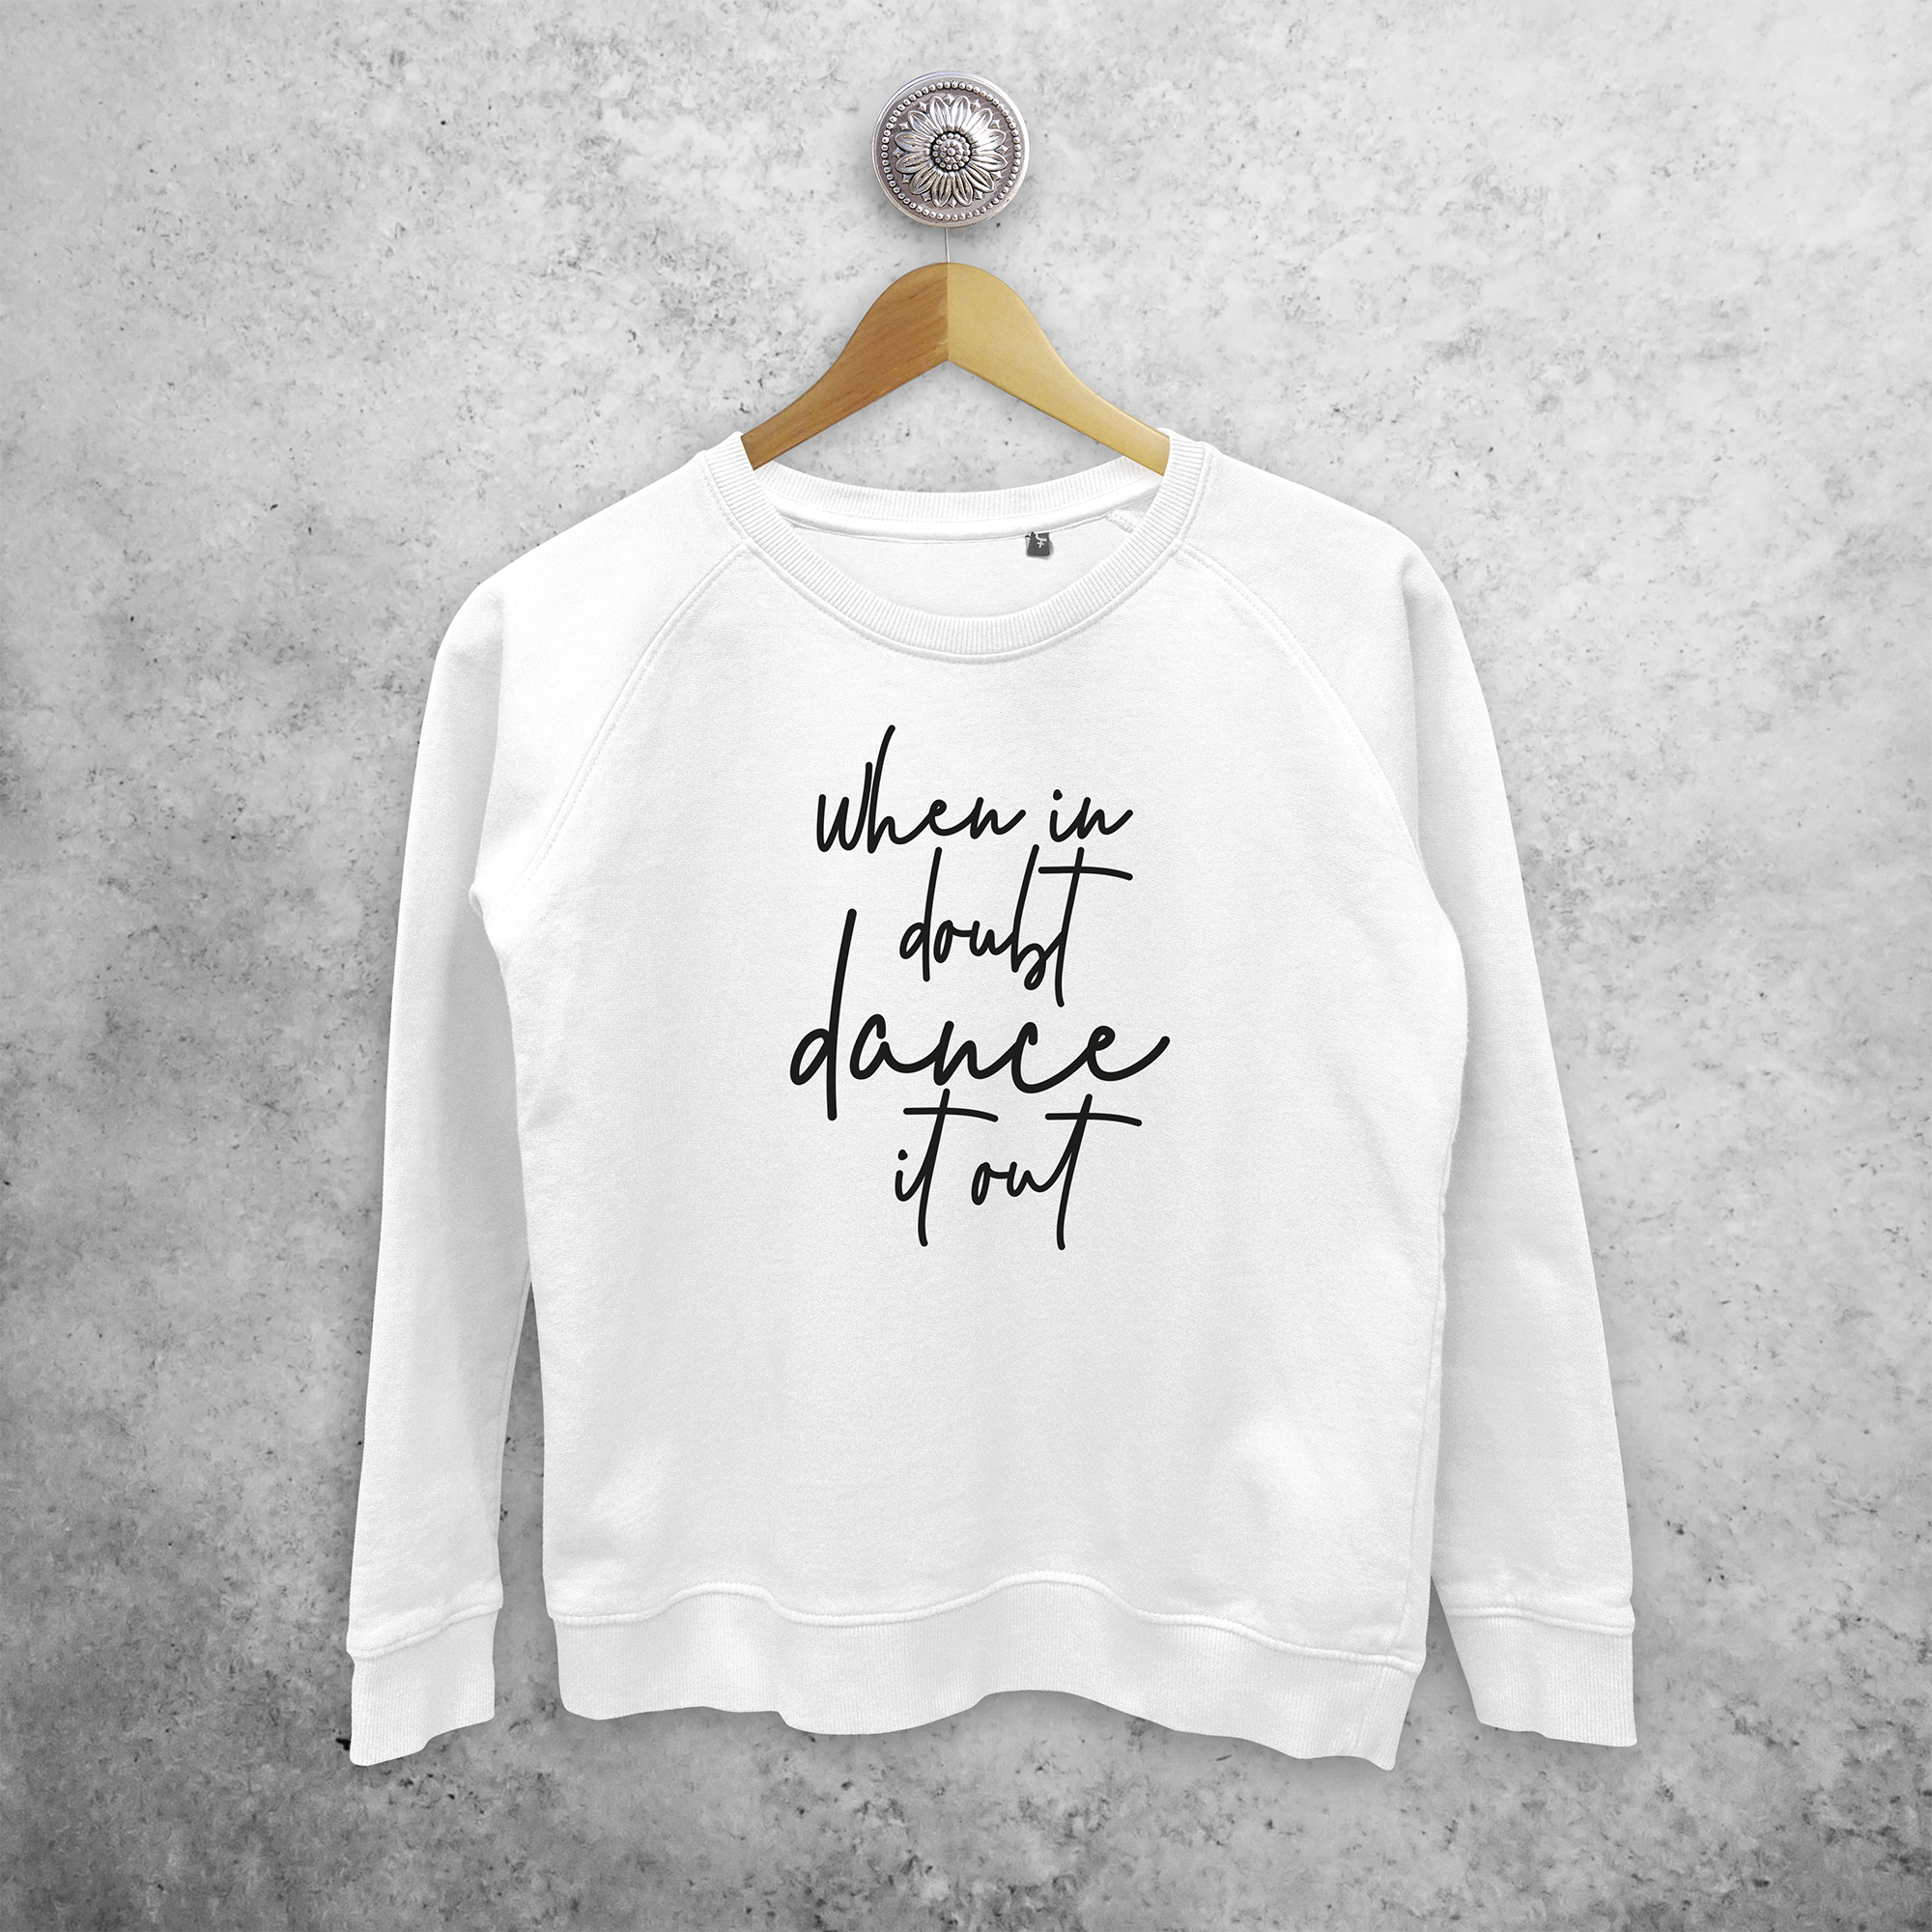 'When in doubt, dance it out' sweater